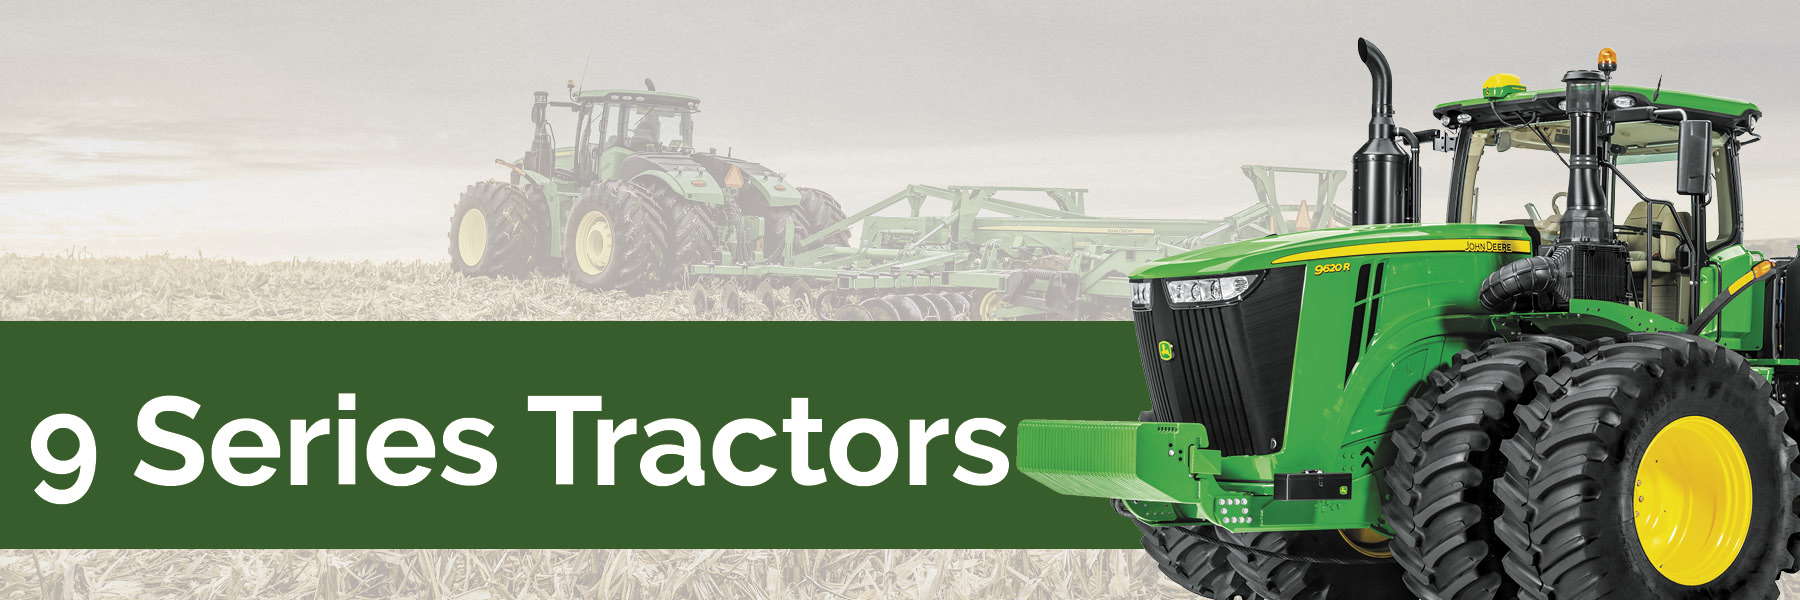 Go to atlantictractor.net (9R9RT9RX-Series subpage)